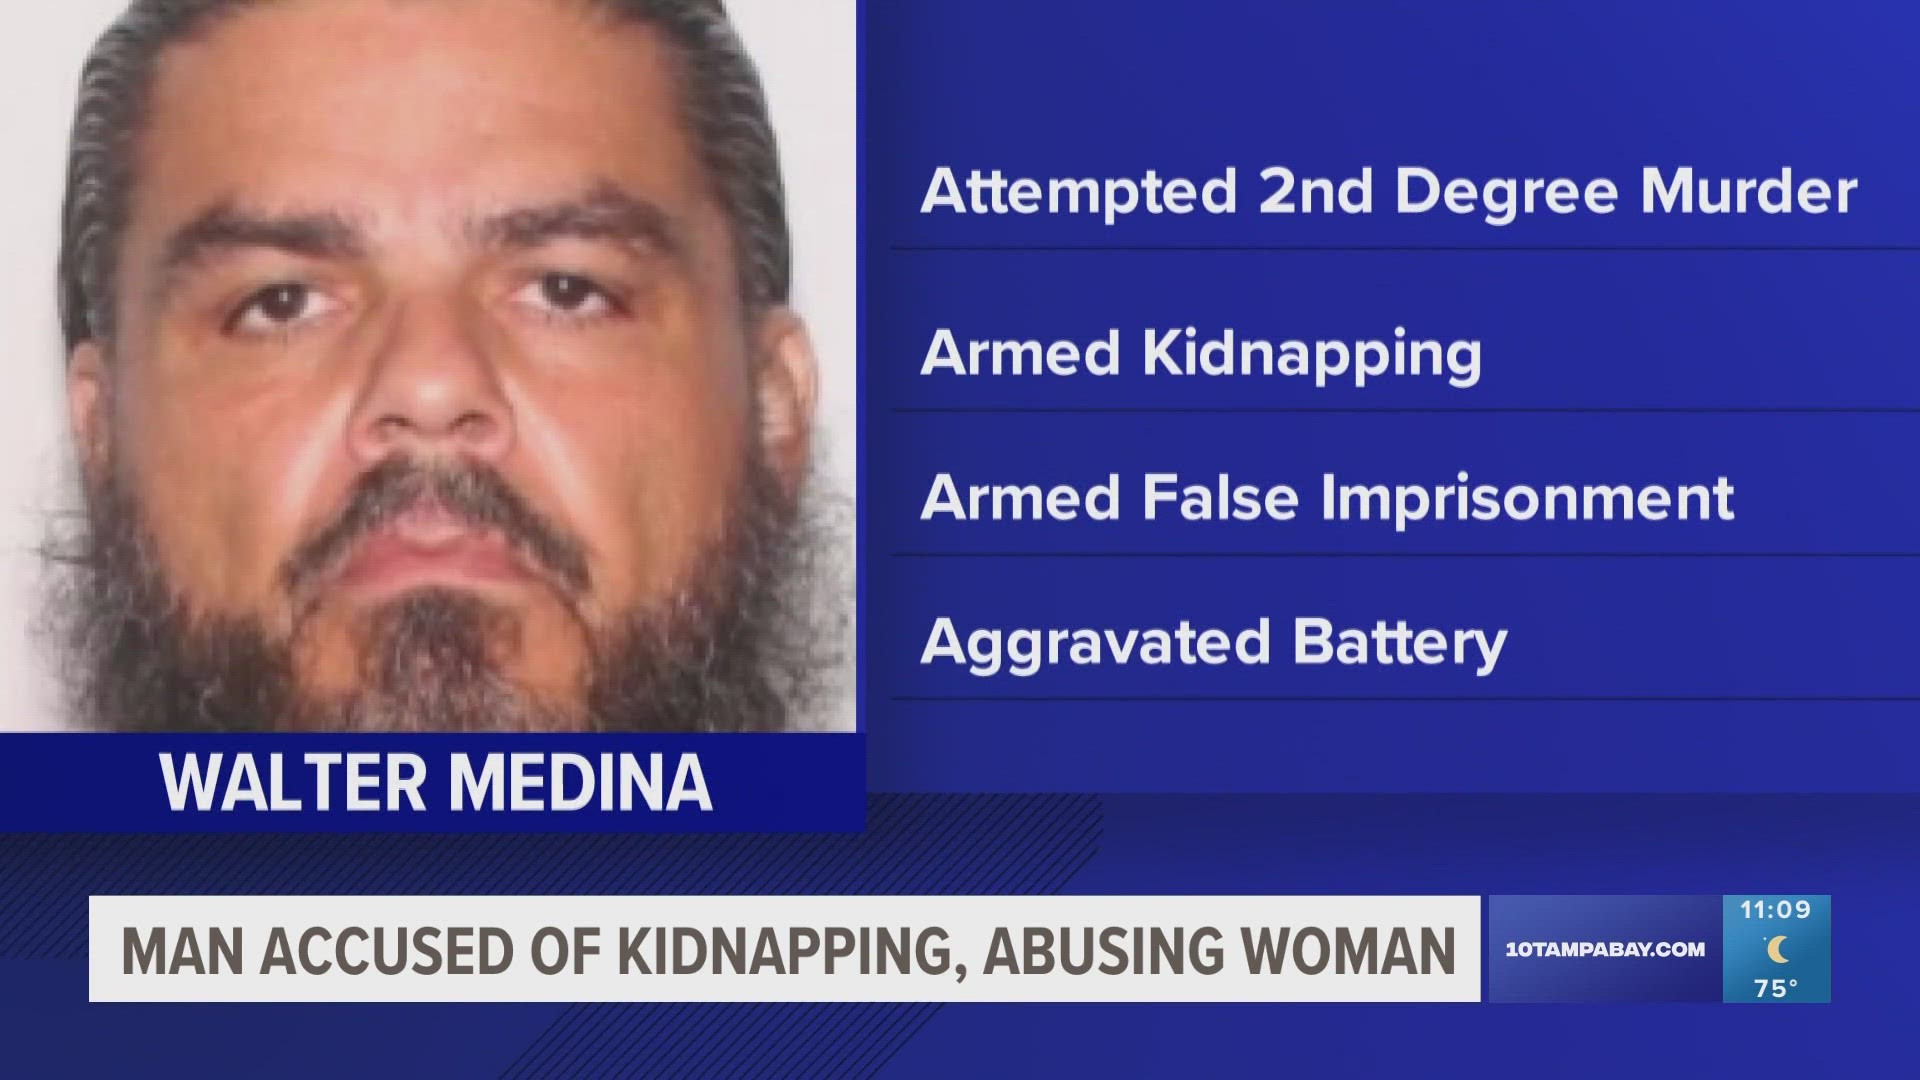 The Hillsborough County Sheriff's Office says Walter Medina assaulted the woman with a wooden baseball bat and a flathead screwdriver, causing multiple injuries.